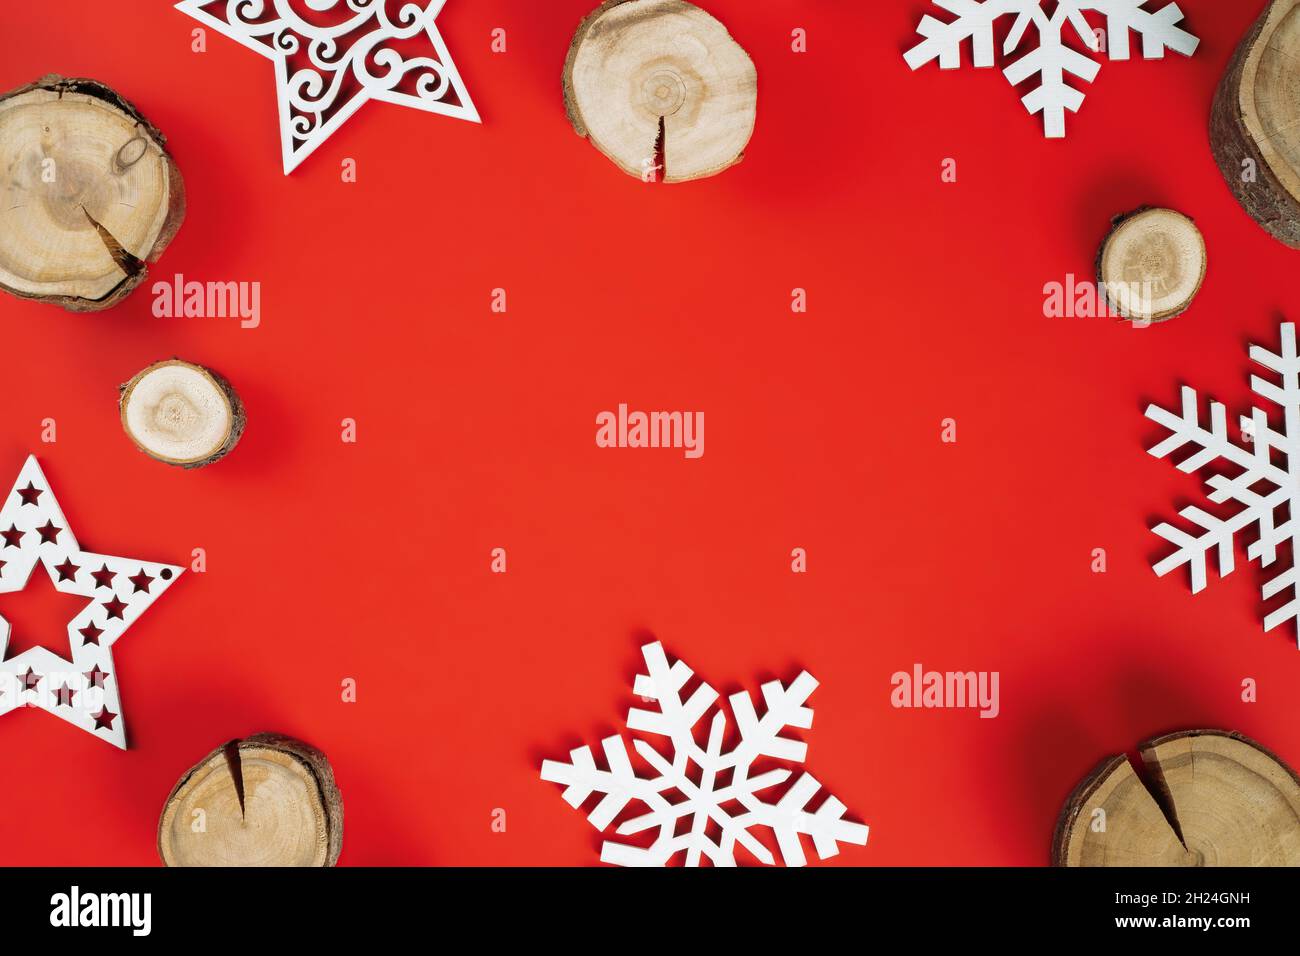 Wood cuts or branch slabs and wooden snowflakes on red background. Christmas or New Year concept. Flat lay. Copy space Stock Photo